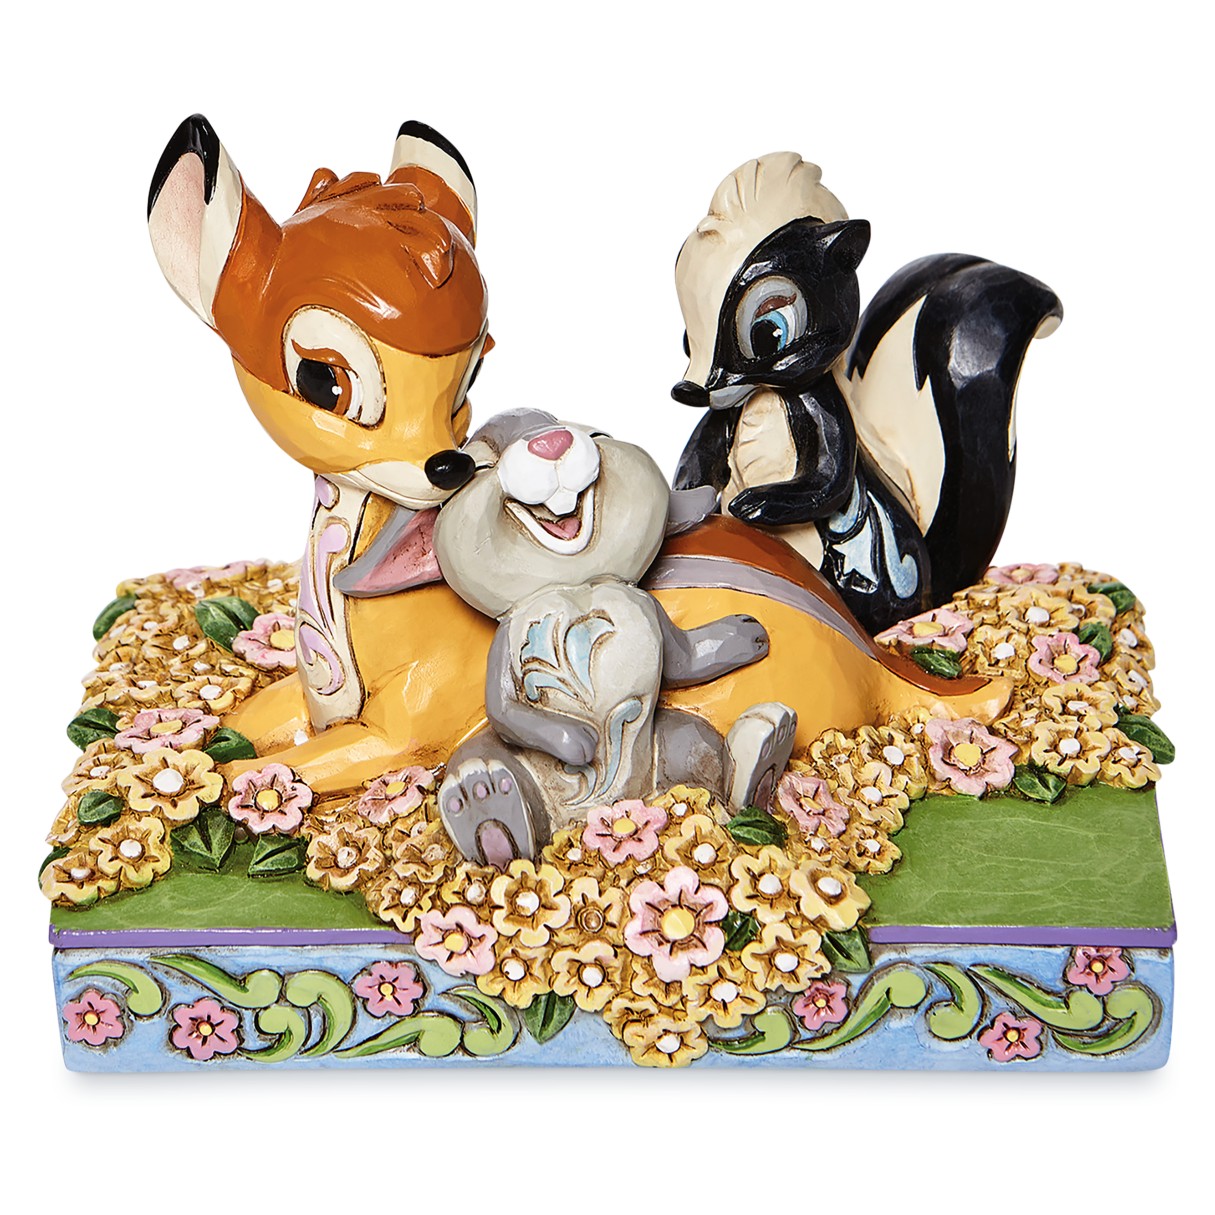 Bambi and Friends ''Childhood Friends'' Figurine by Jim Shore